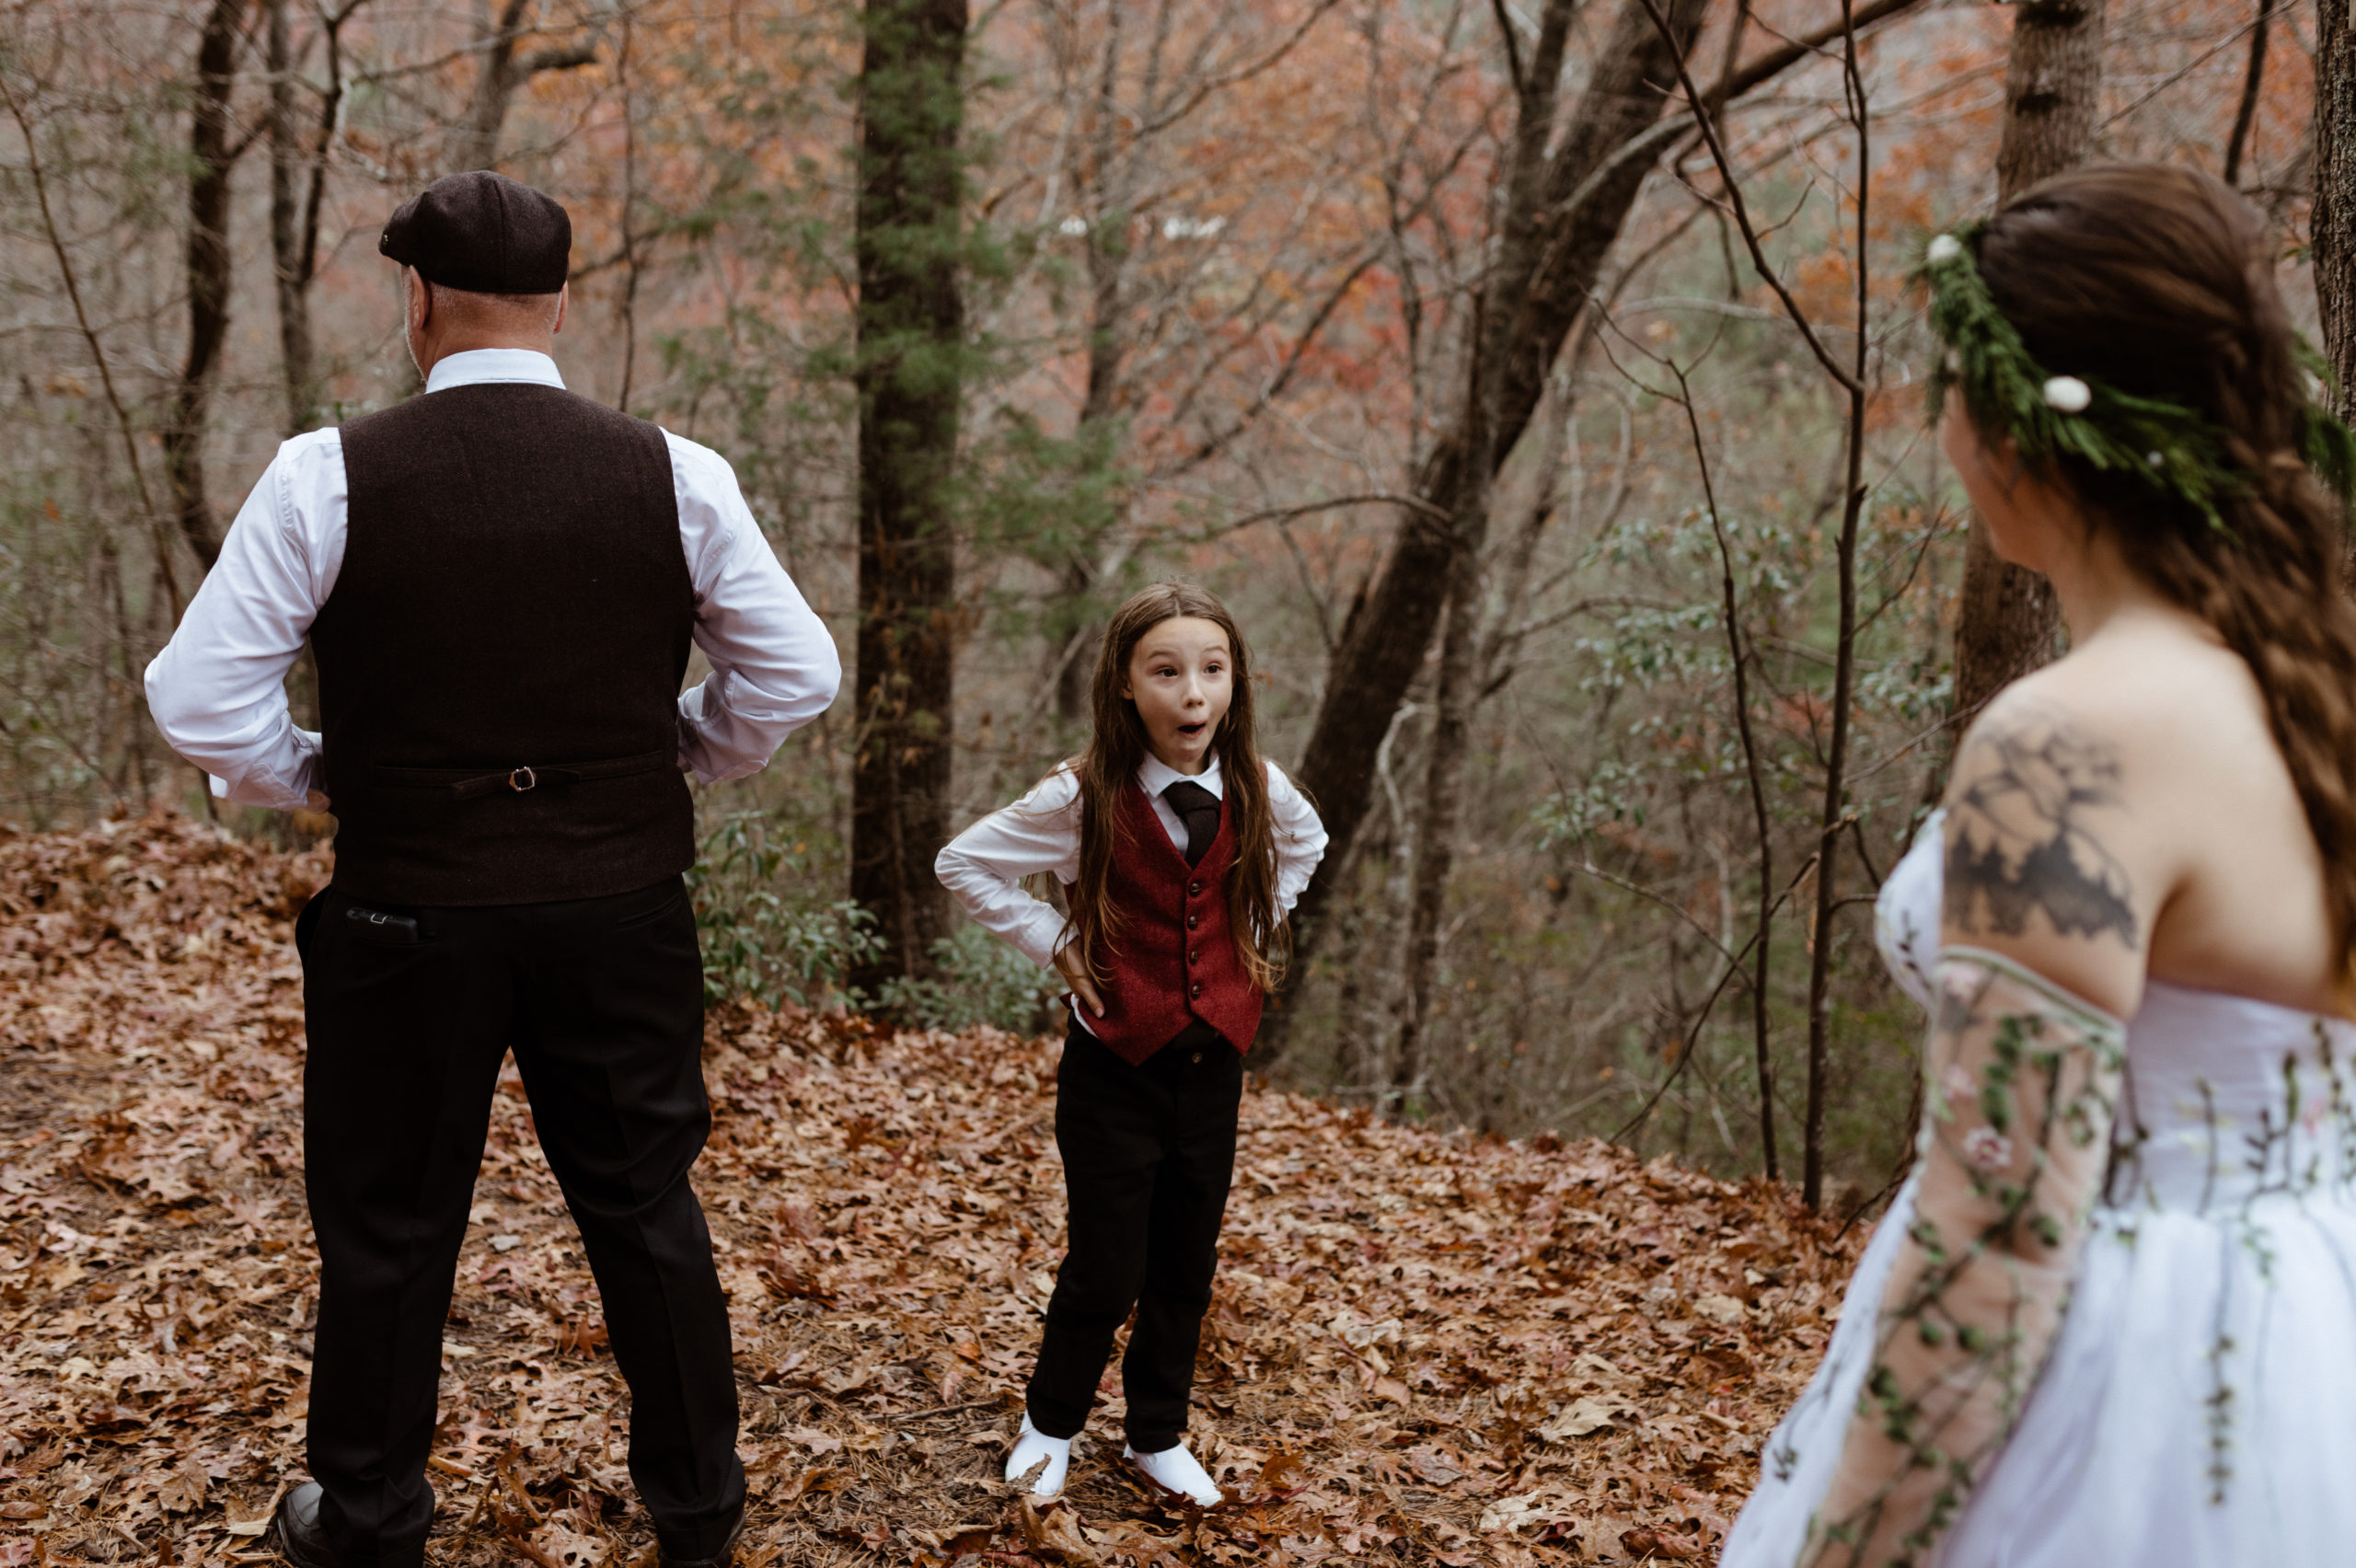 First look between the bride and her son at their wedding in Asheville, North Carolina